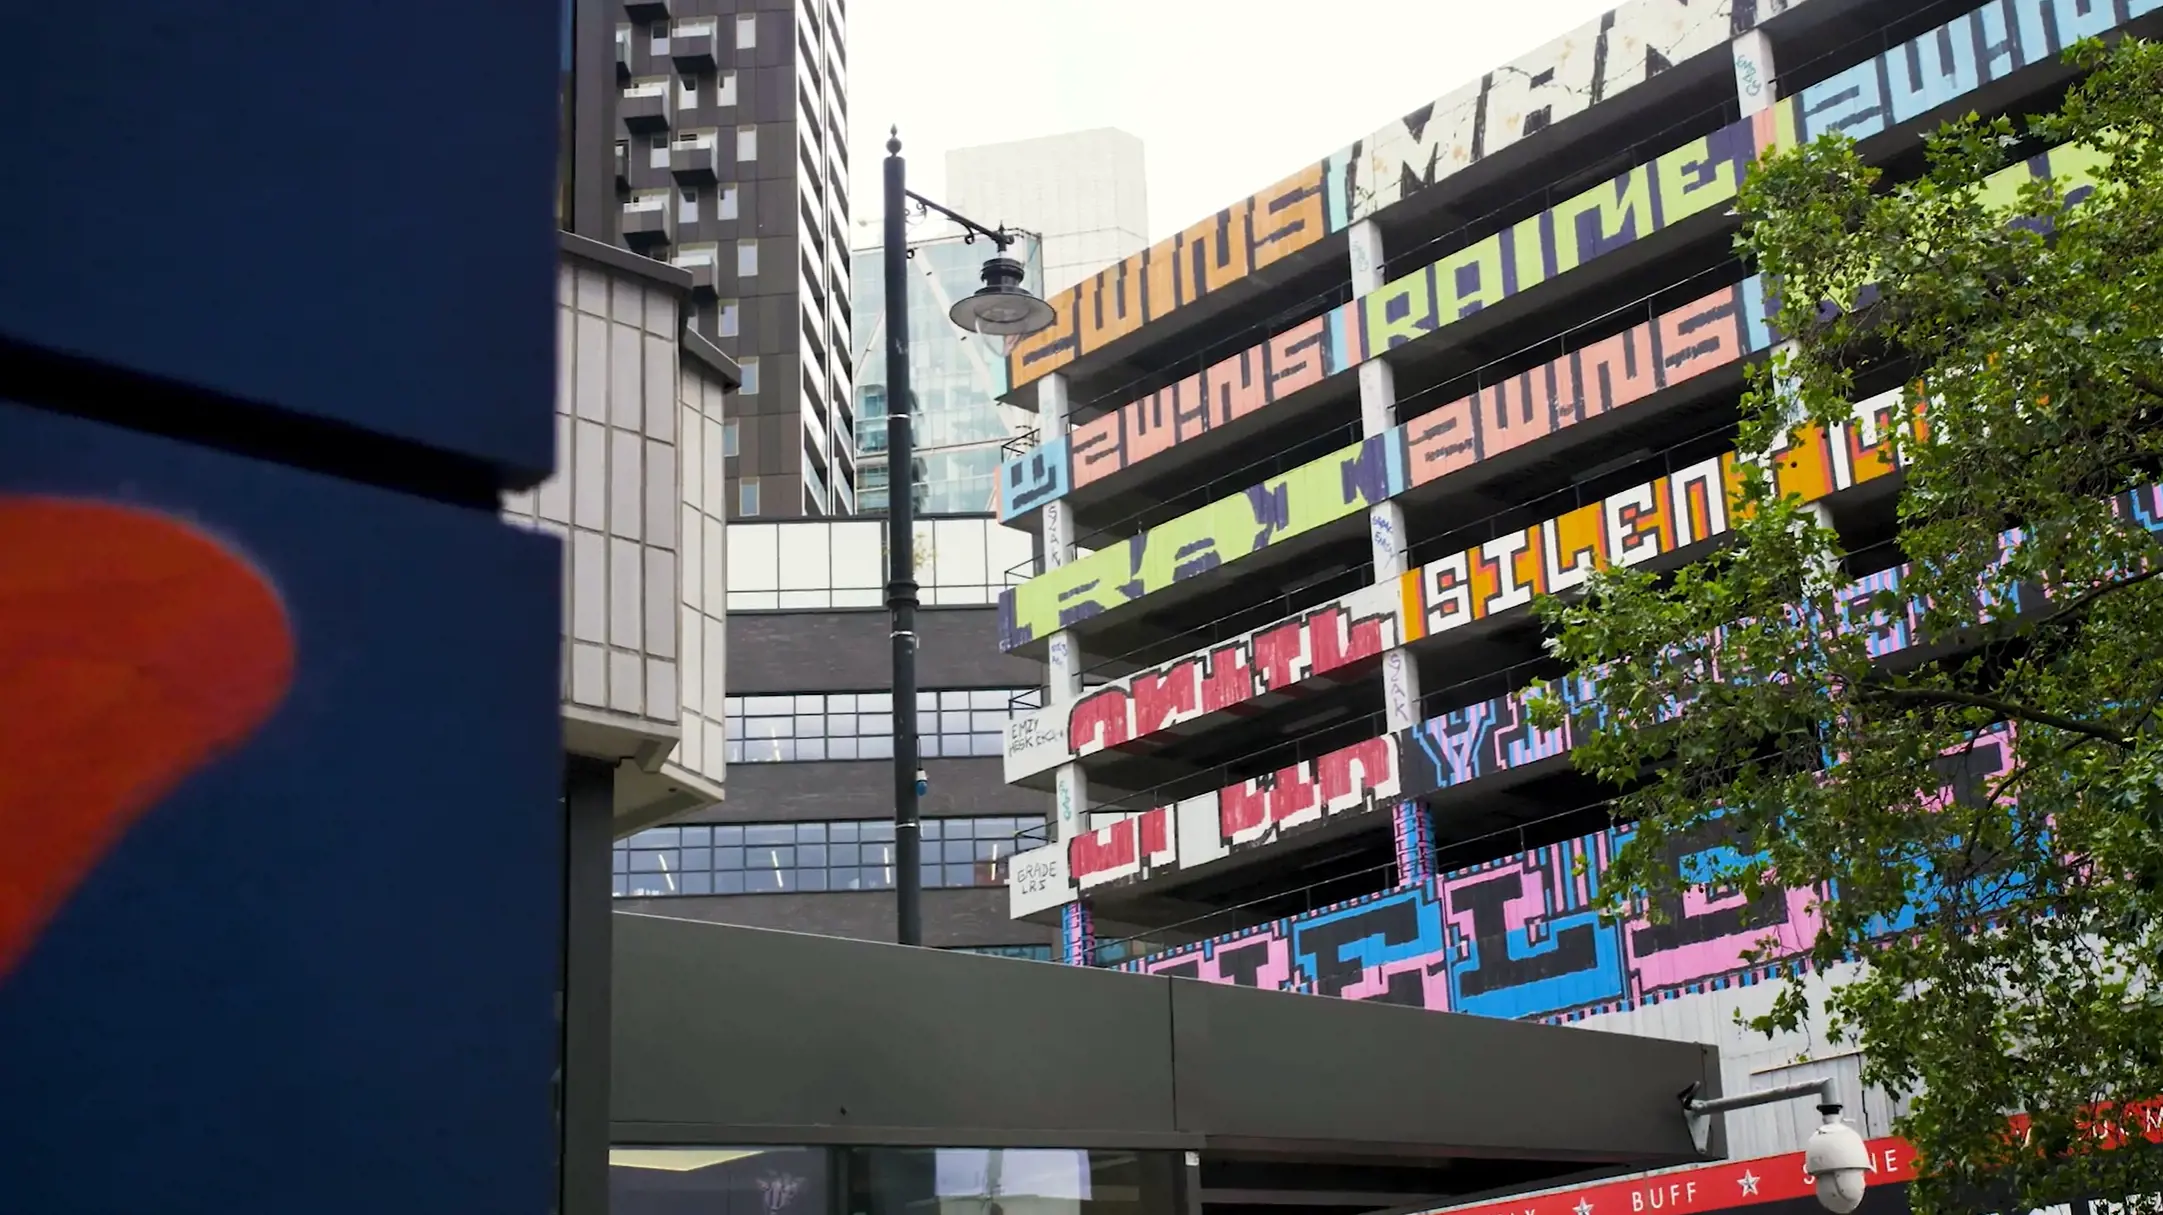 An urban art installation featuring large, colourful typography 